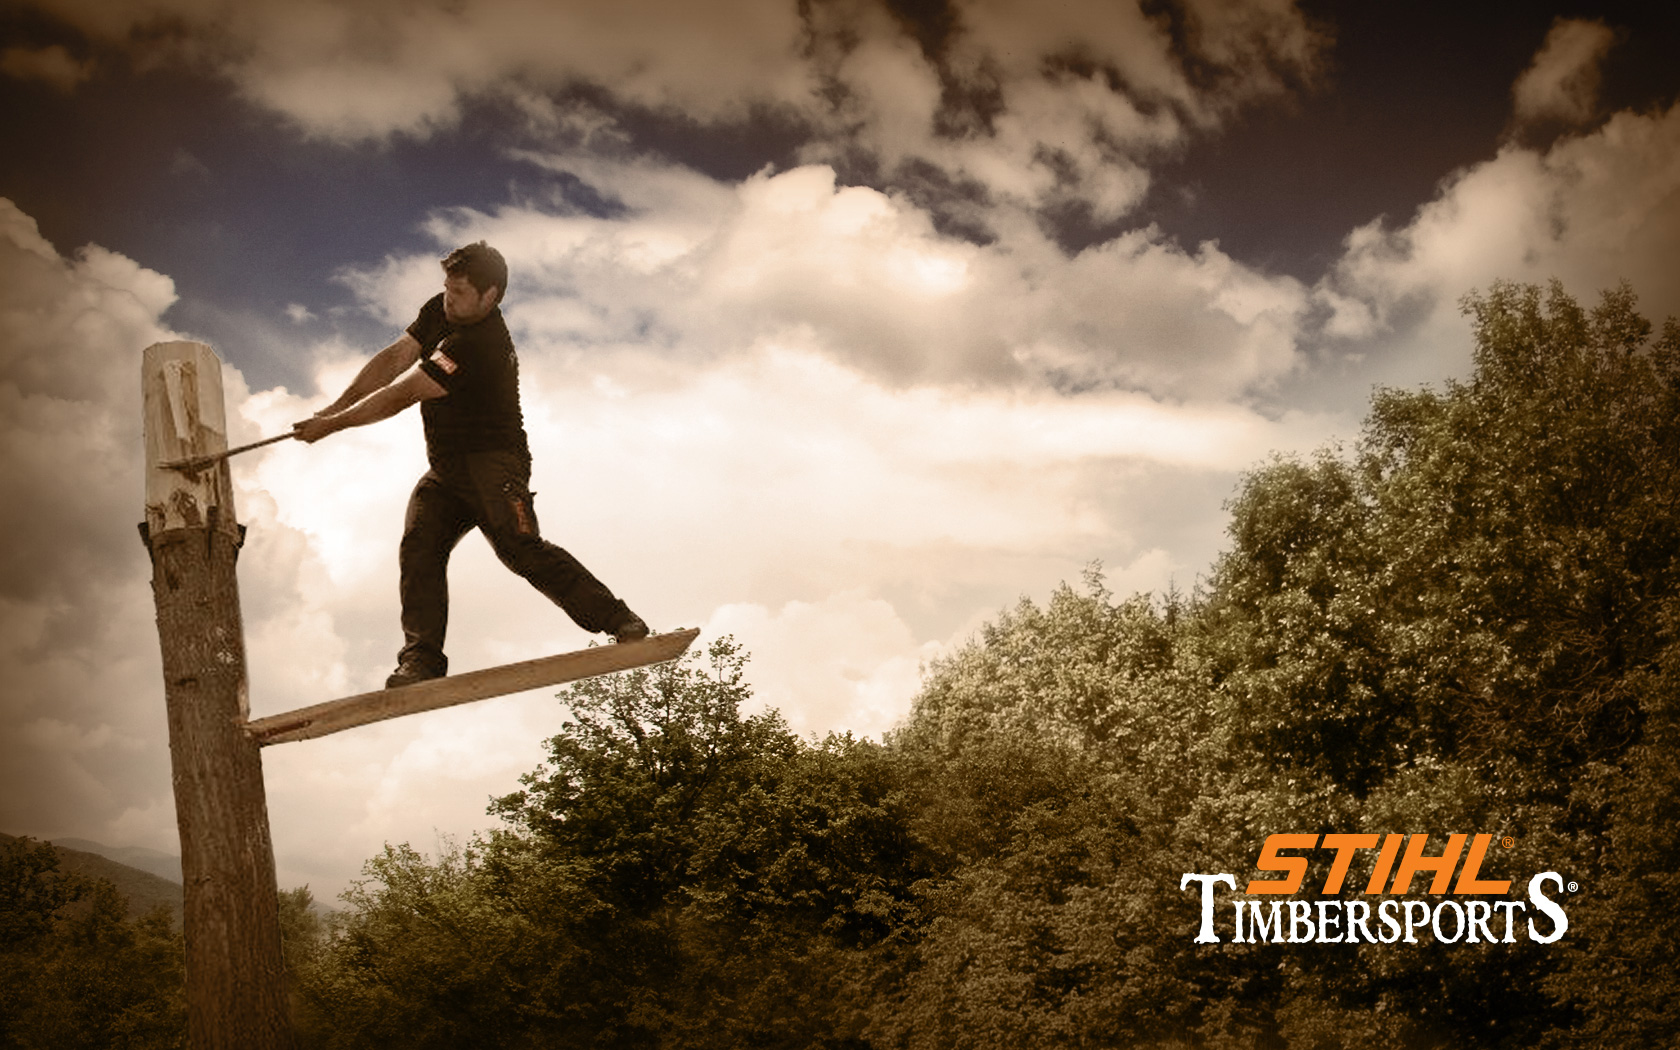 Stihl Timbersports Able Wallpaper Background